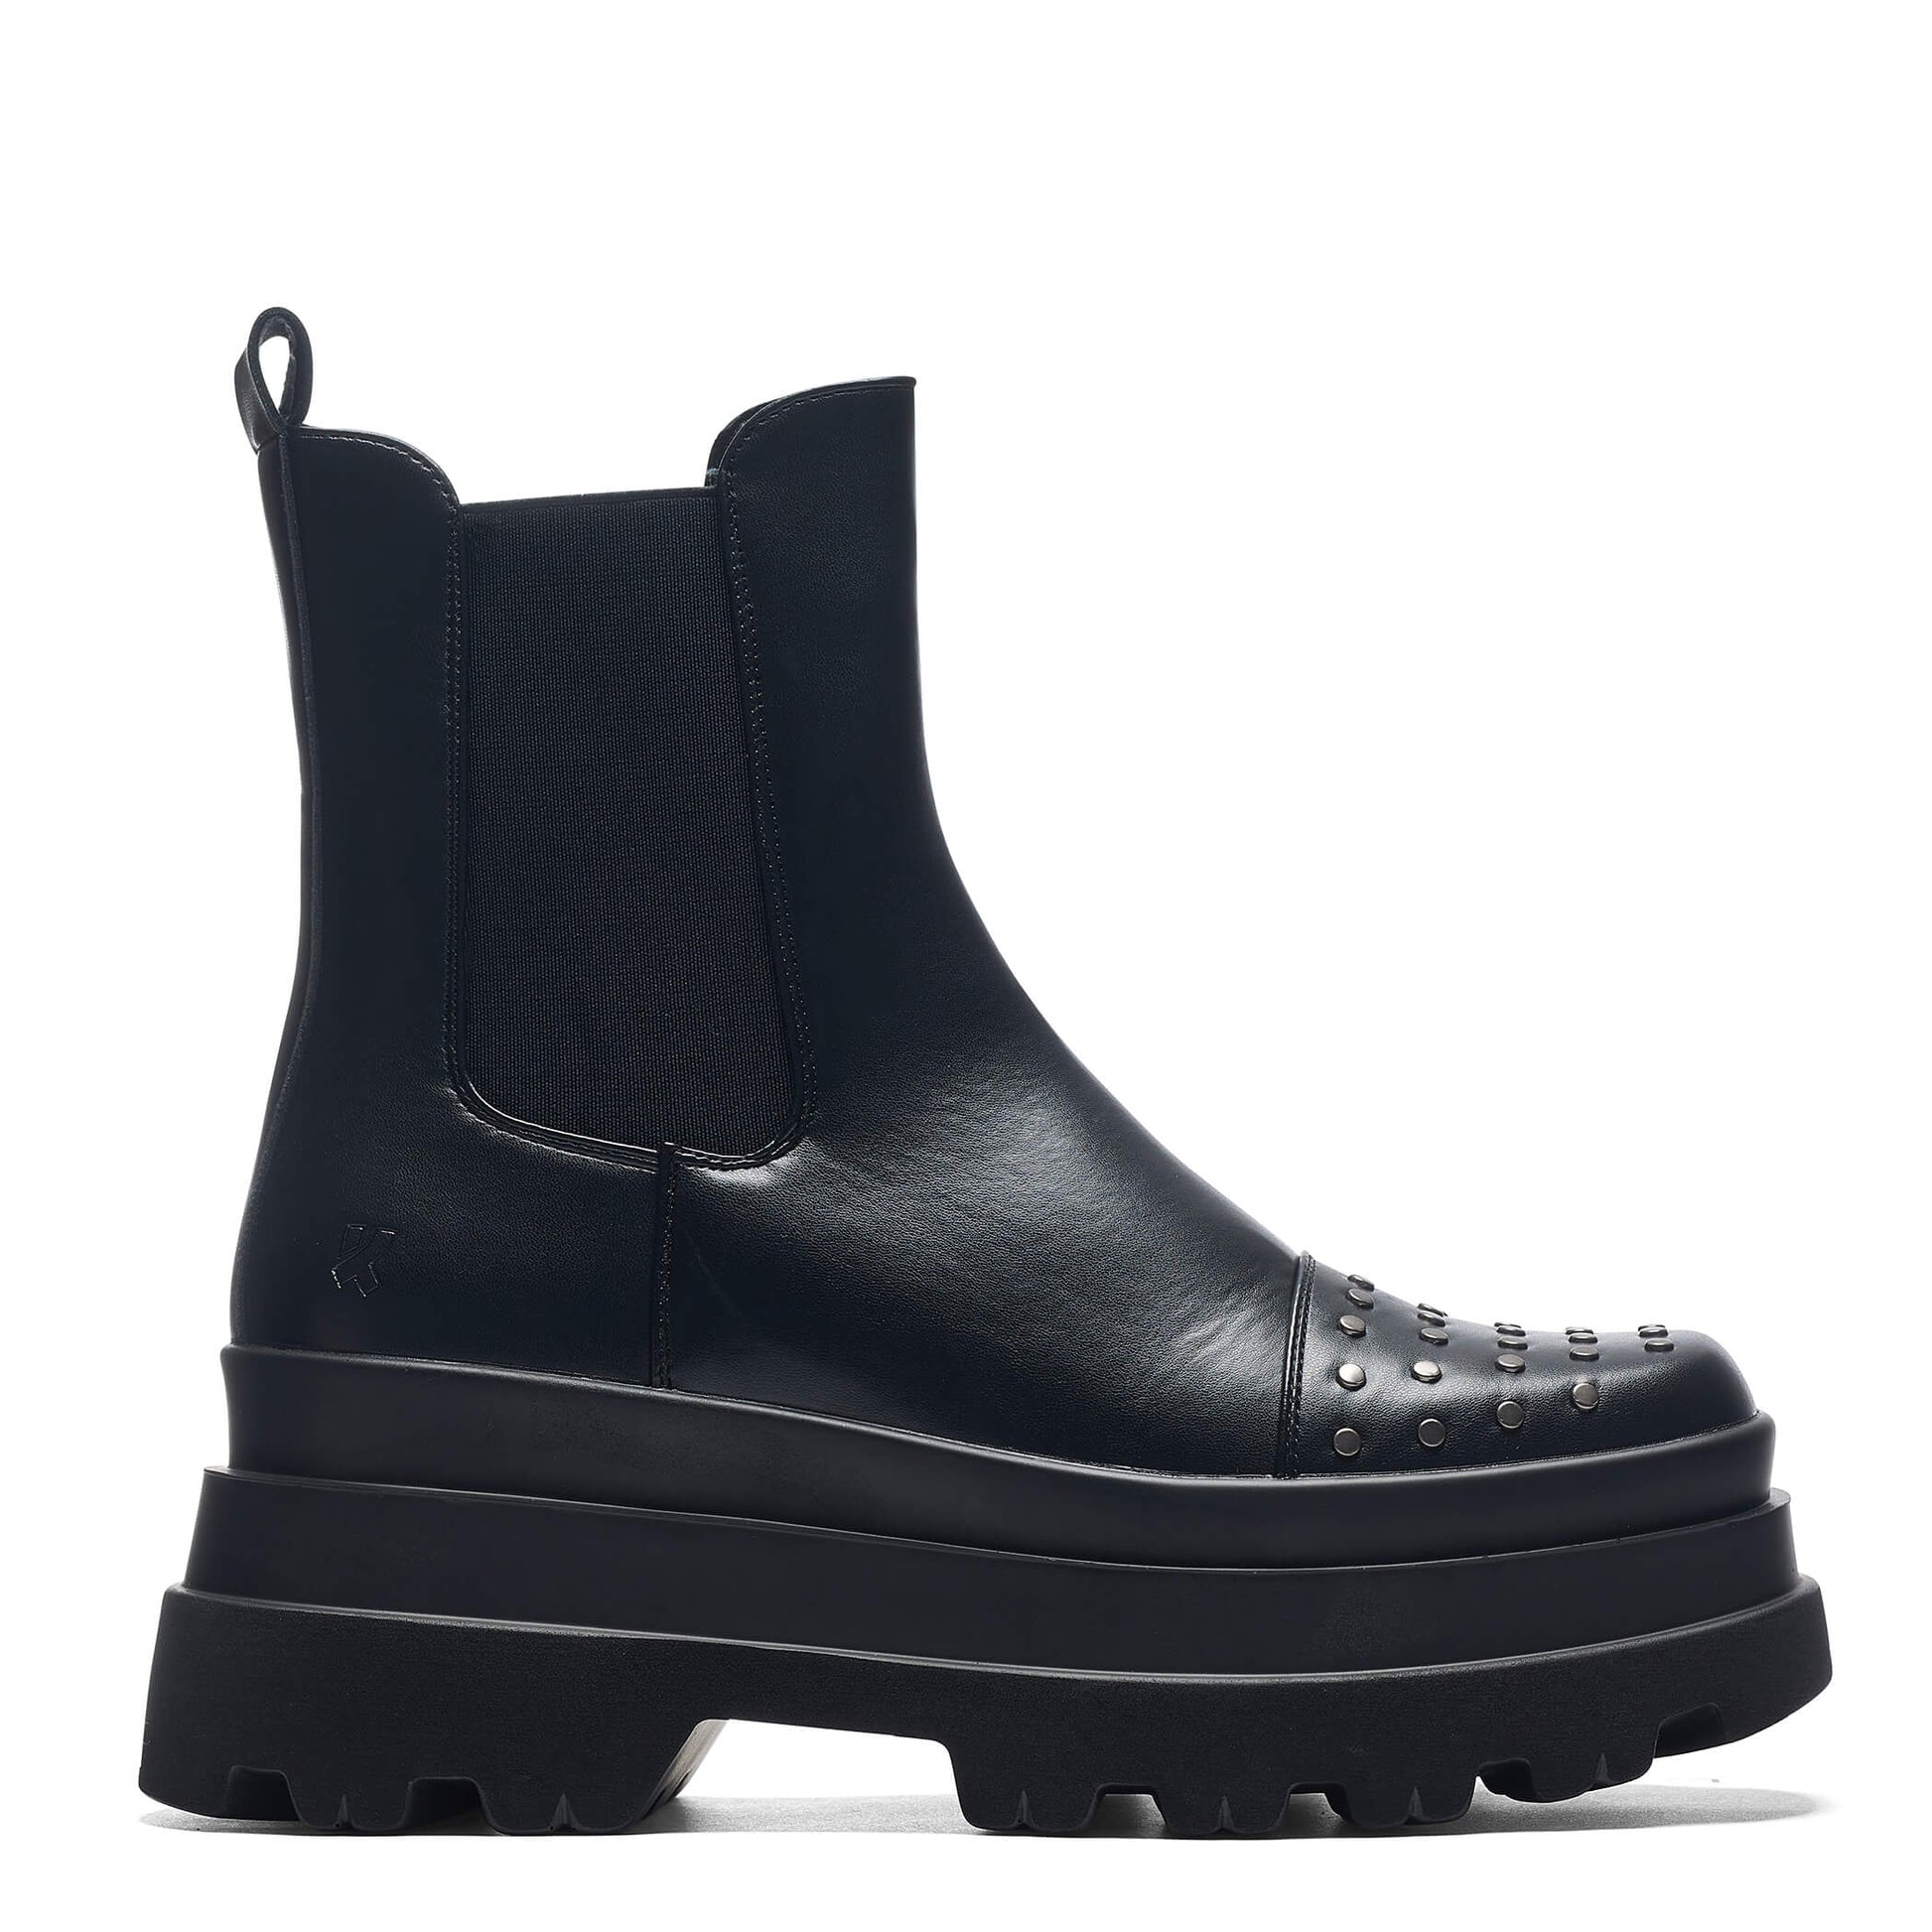 Silence Studded Trident Chelsea Boots - Black - Ankle Boots - KOI Footwear - Black - Side View